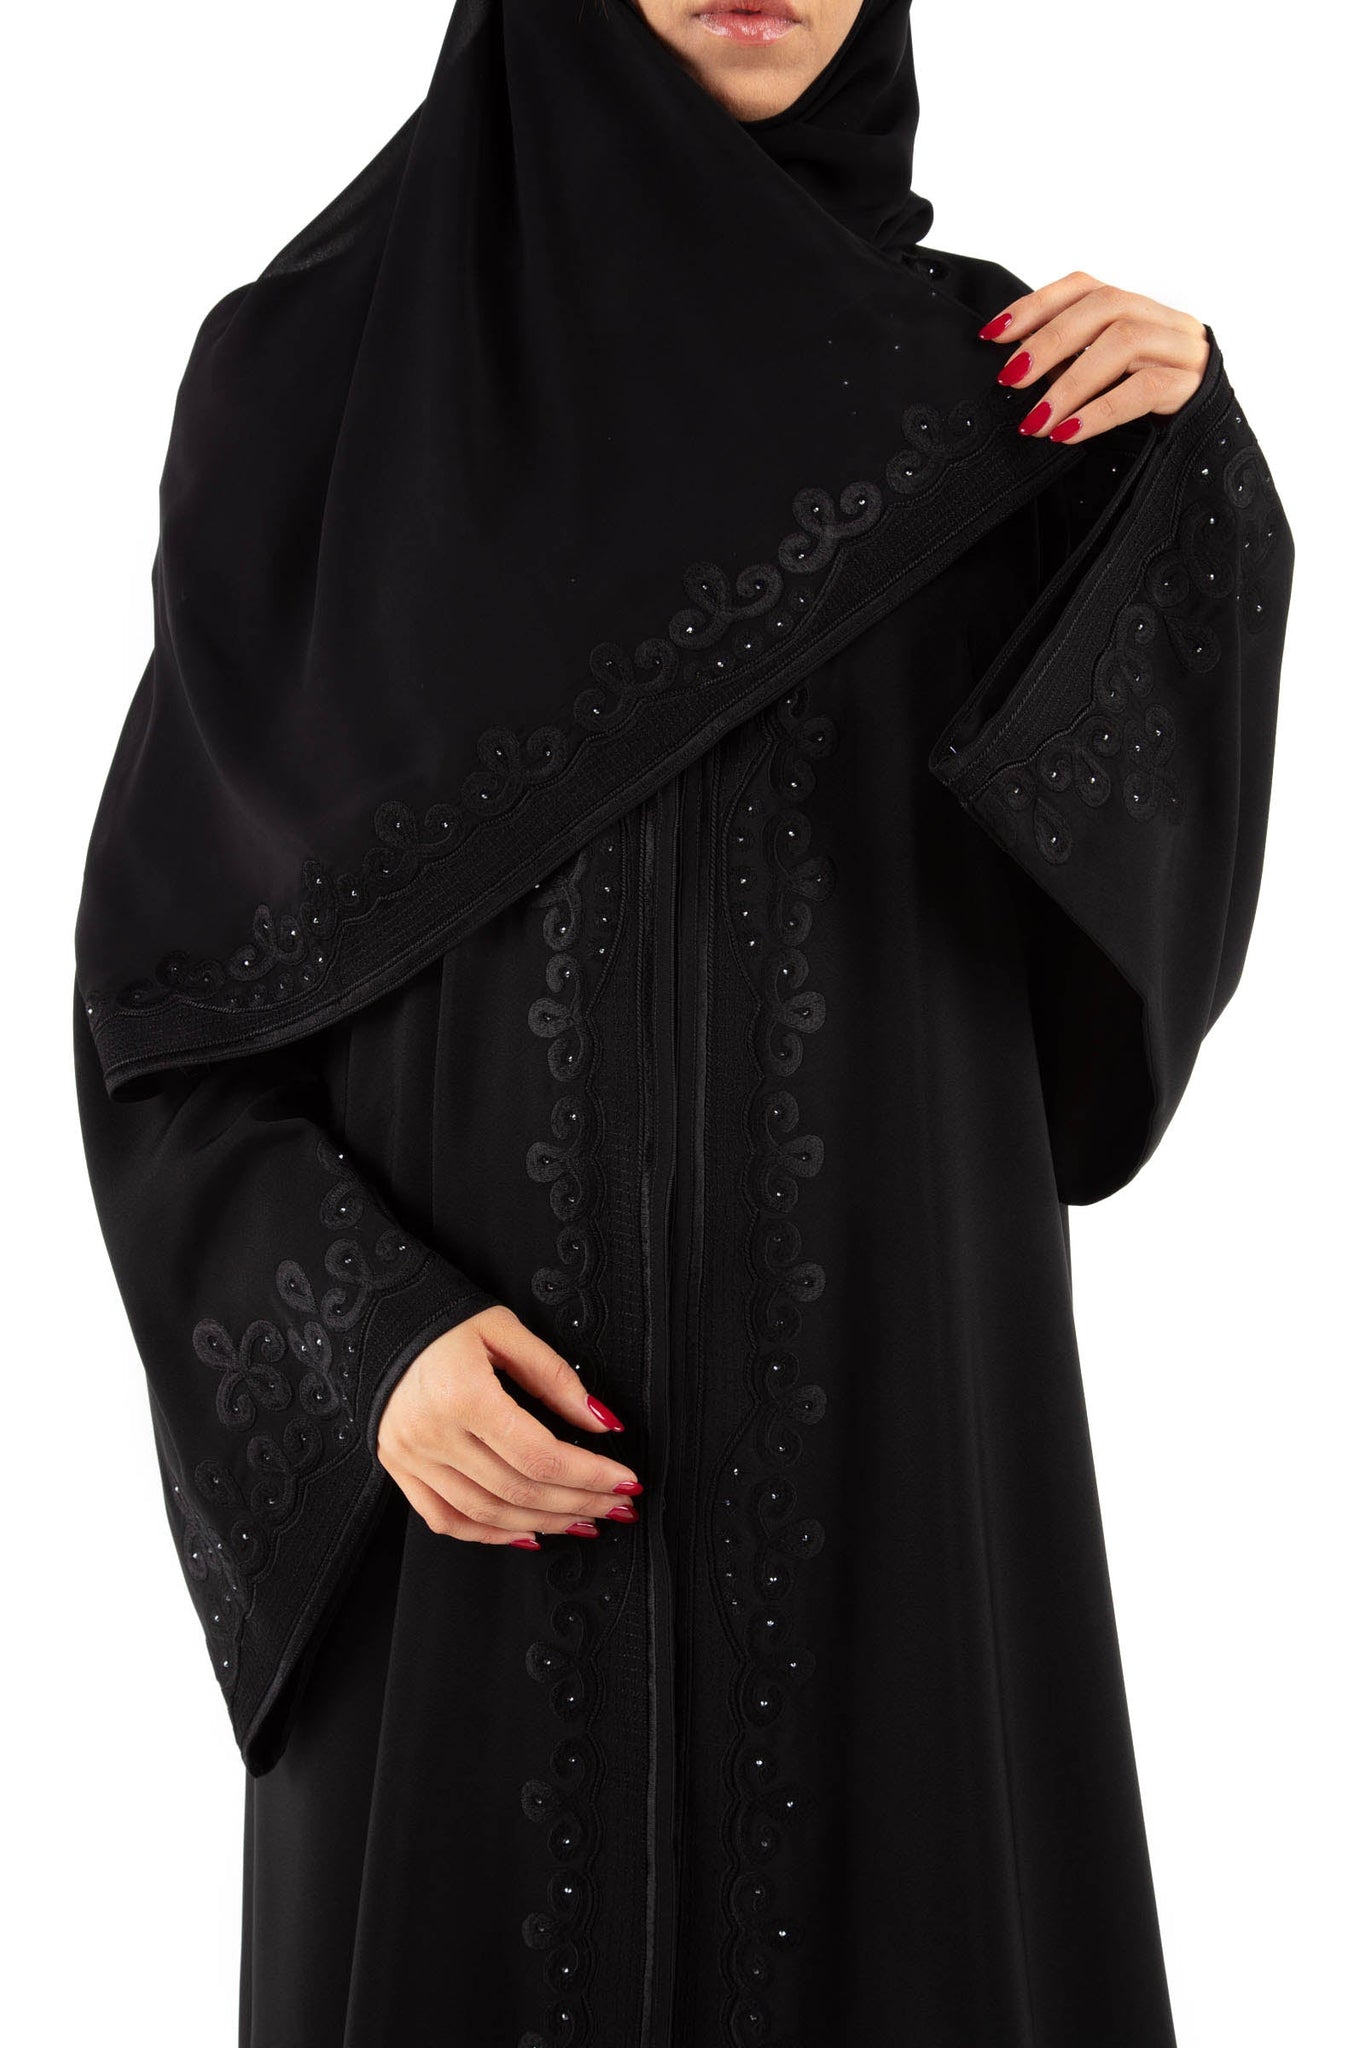 Hanayen Abaya In Black With Embroidered Designs And Crystal Embellishments